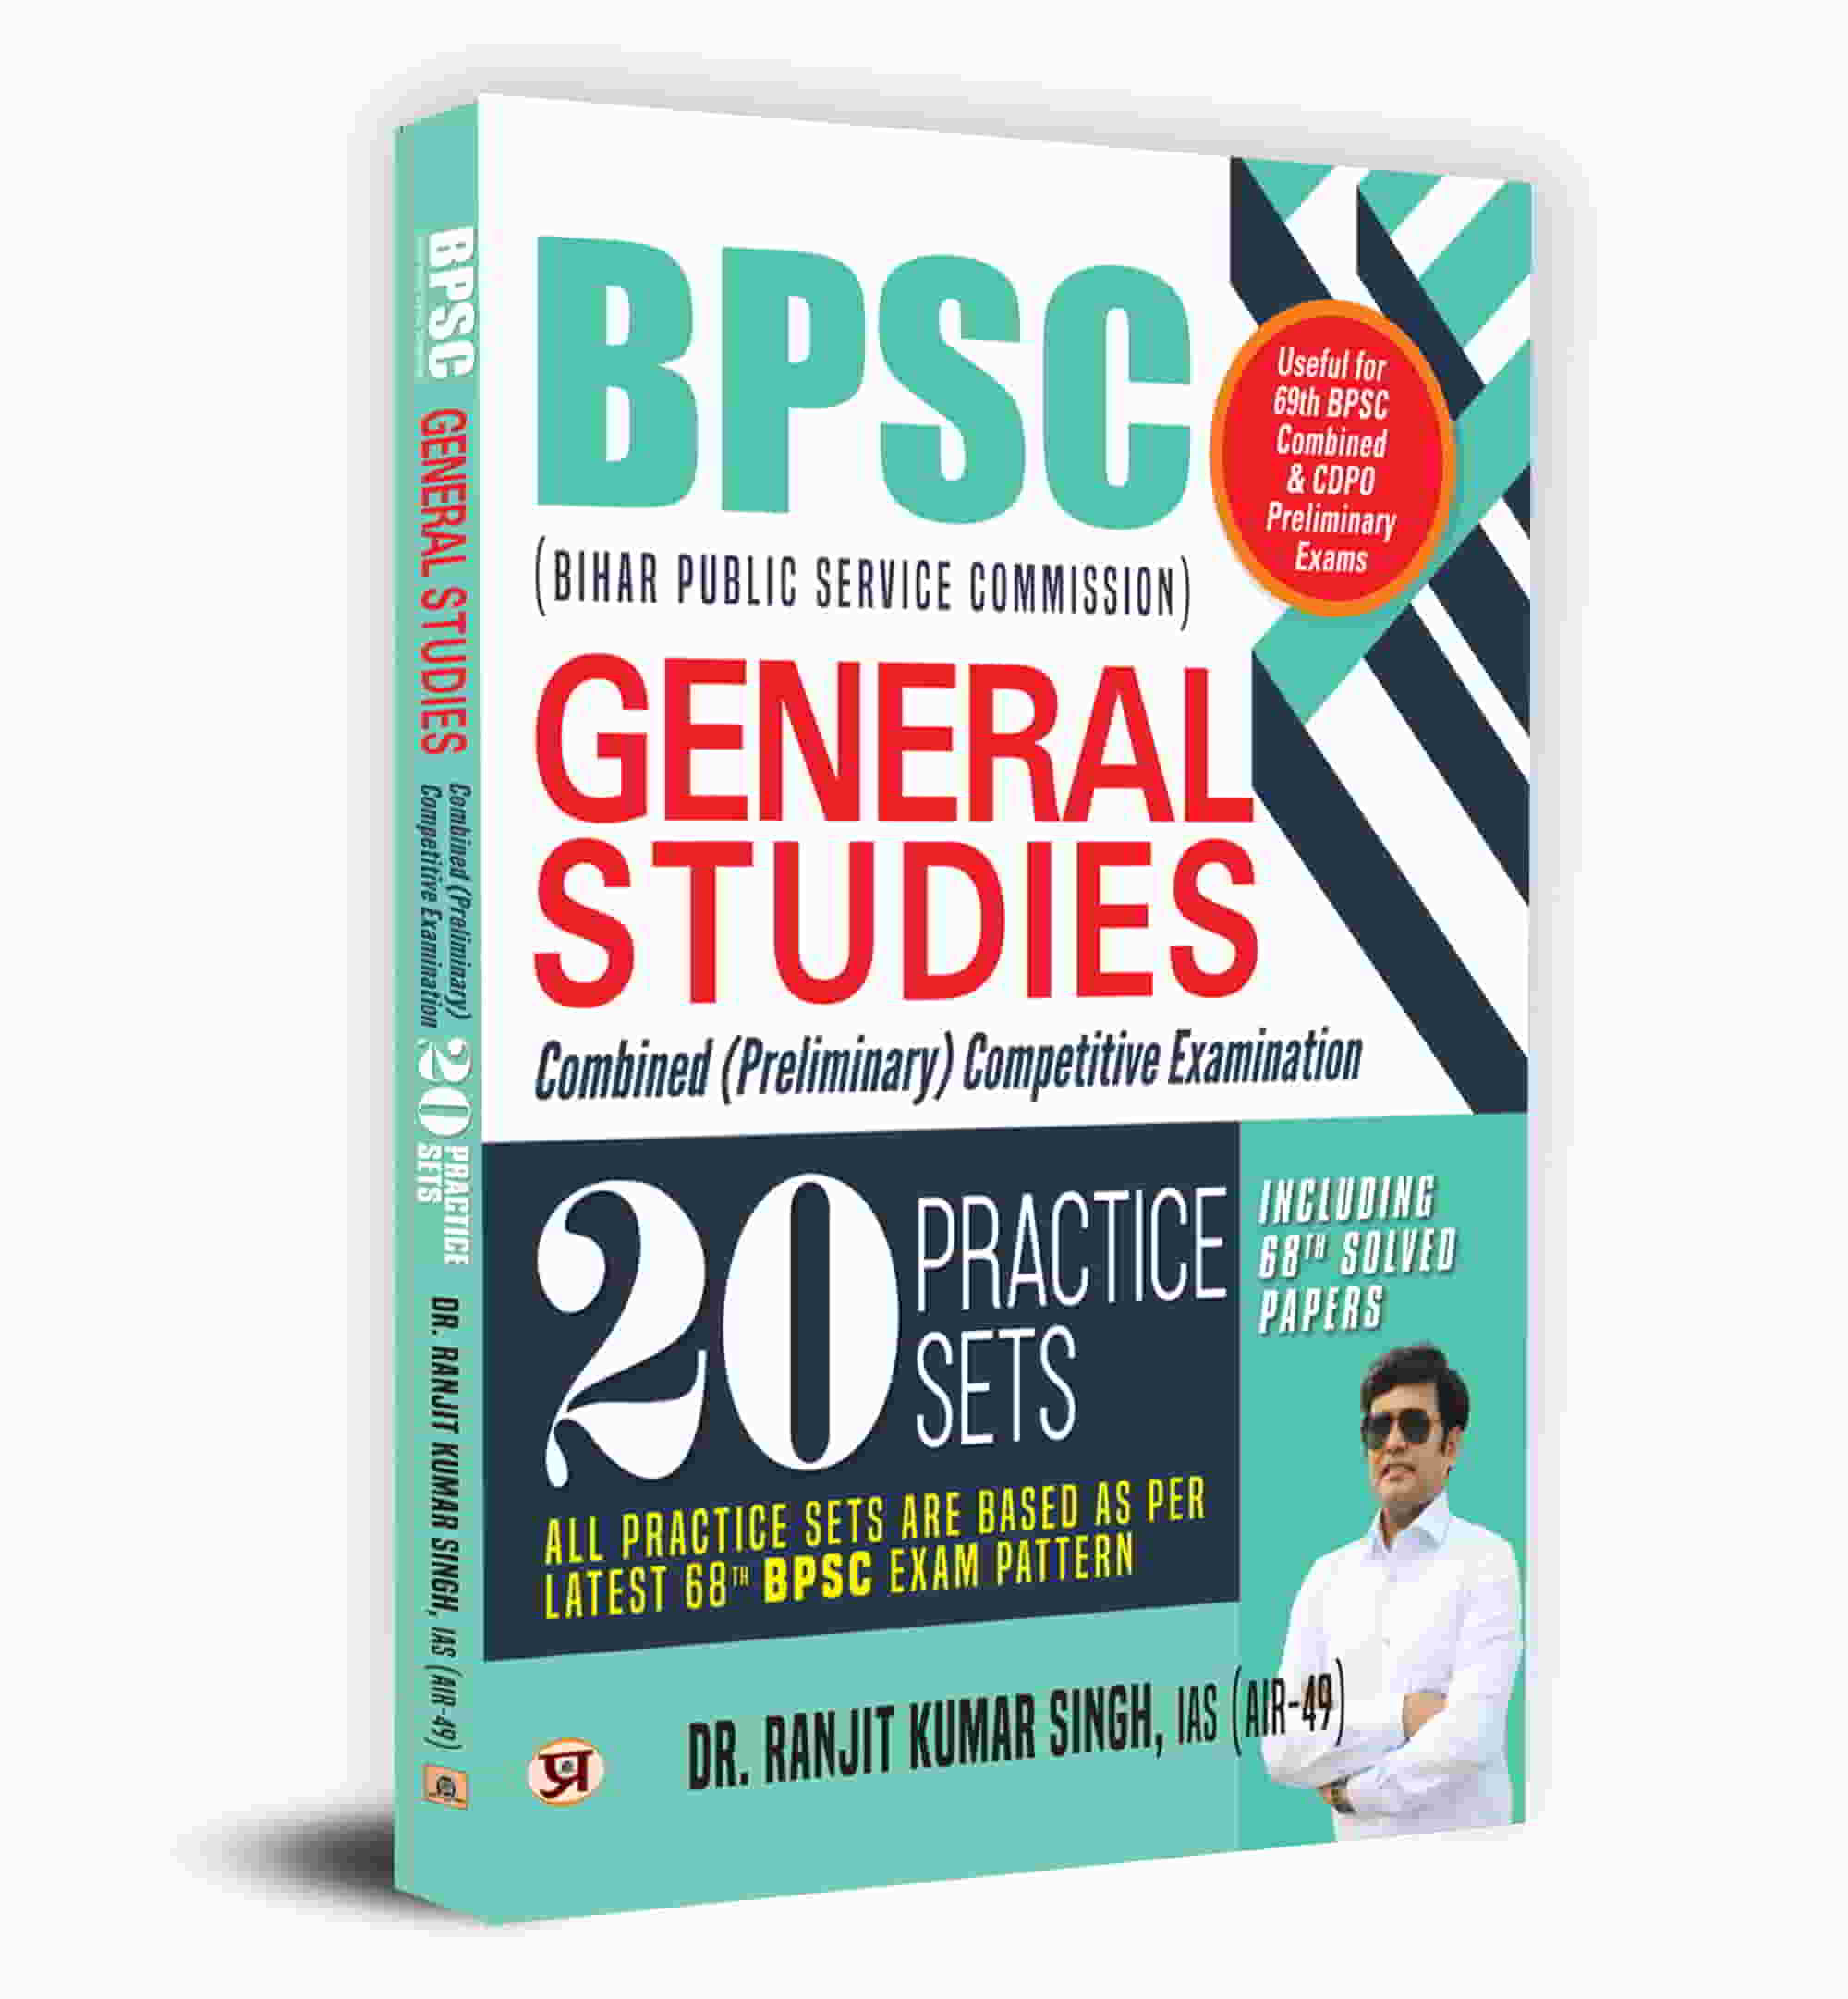 BPSC (Bihar Public Service Commission) General Studies  Combined (Preliminary) Competitive Examination 20 Practice Sets